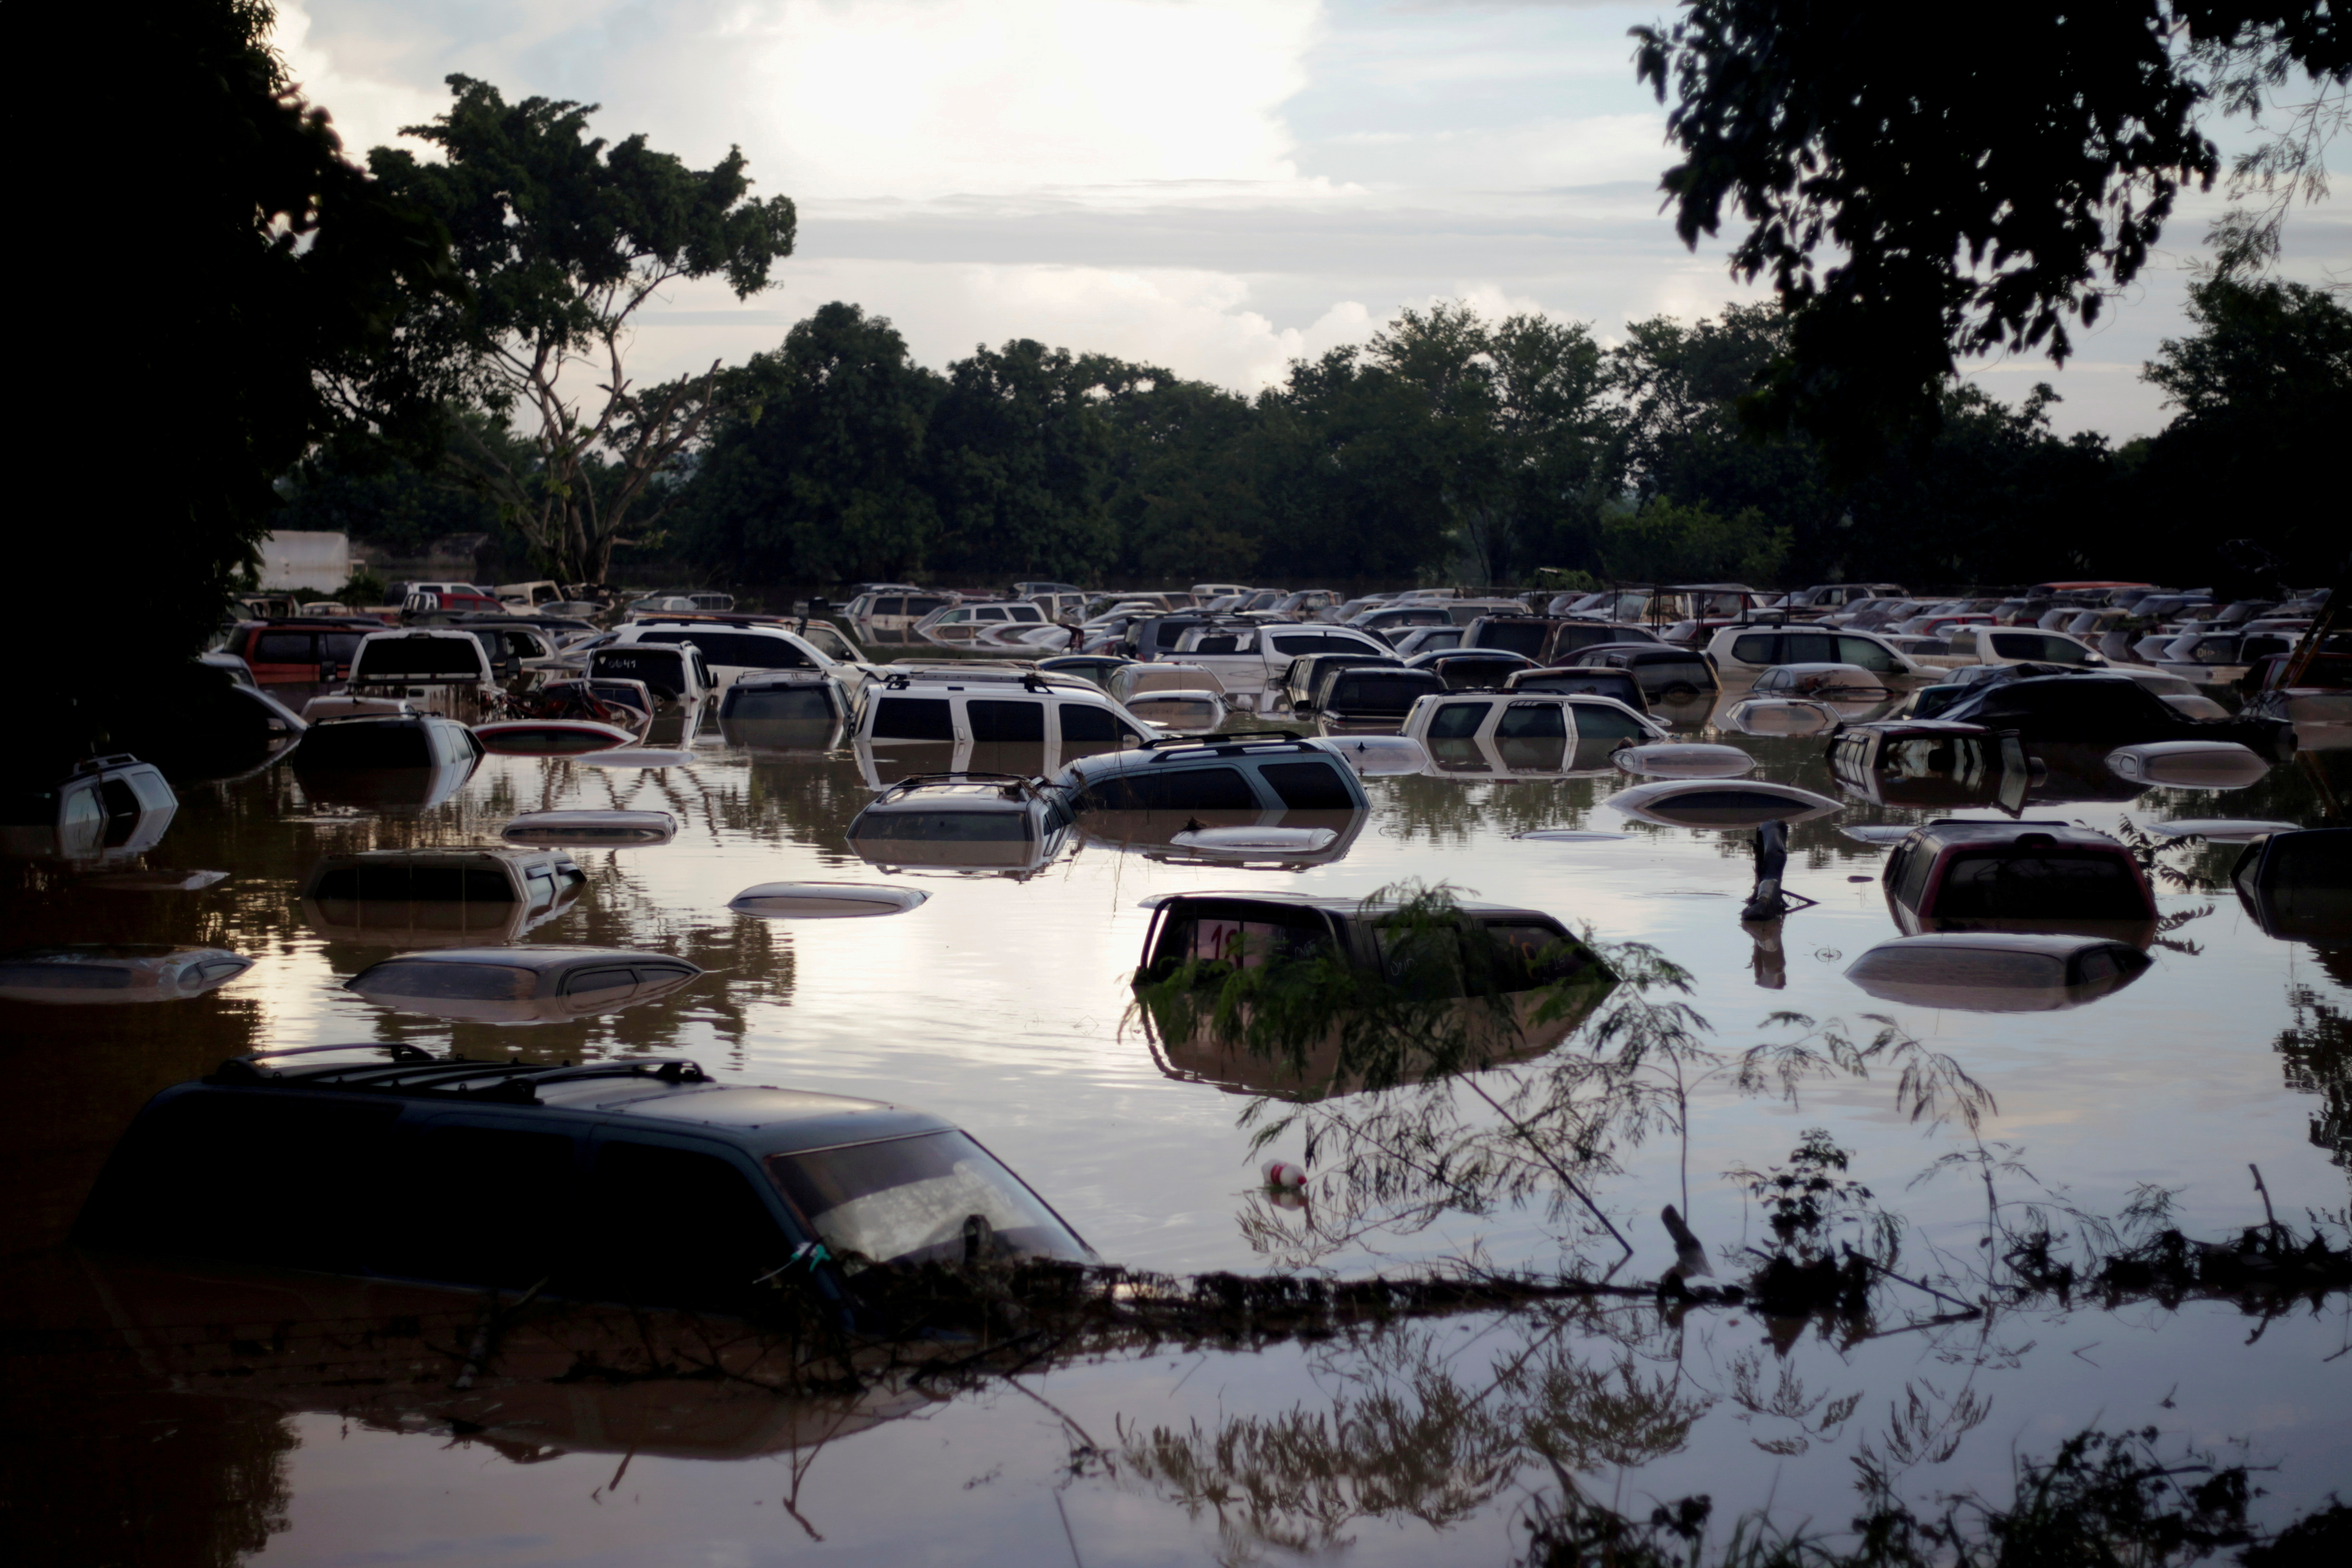 Vehicles are submerged at a plot flooded by the Chamelecon River due to heavy rain caused by Storm Iota, in La Lima